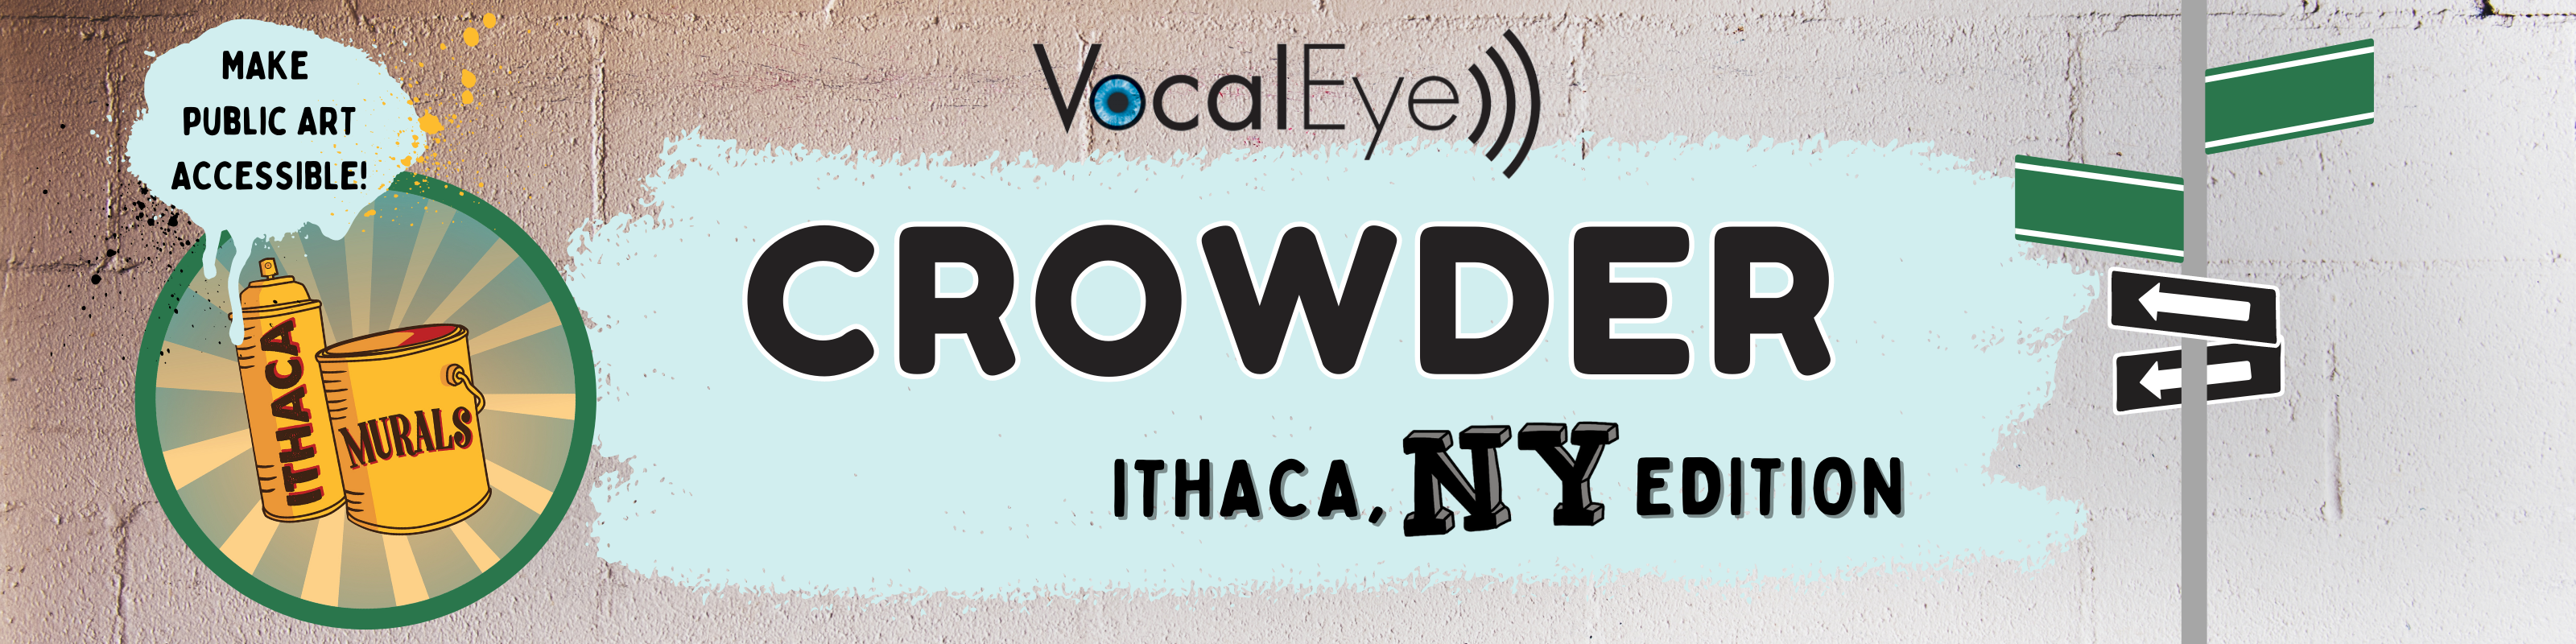 Infographic reading: 'VocalEye Crowder, Ithaca, NY Edition' in the center; the text is black and is shown over a pale blue paint swatch. The left side of the graphic contains a pale blue paint splotch with the words 'Make public art accessible!' which is also superimposed above an Ithaca Murals logo (golden spray paint canister and paint can with a dark green and yellow radial sunburst background). The right side of the graphic contains a signpost with unlabeled green street signs and black signs with white arrows on them.